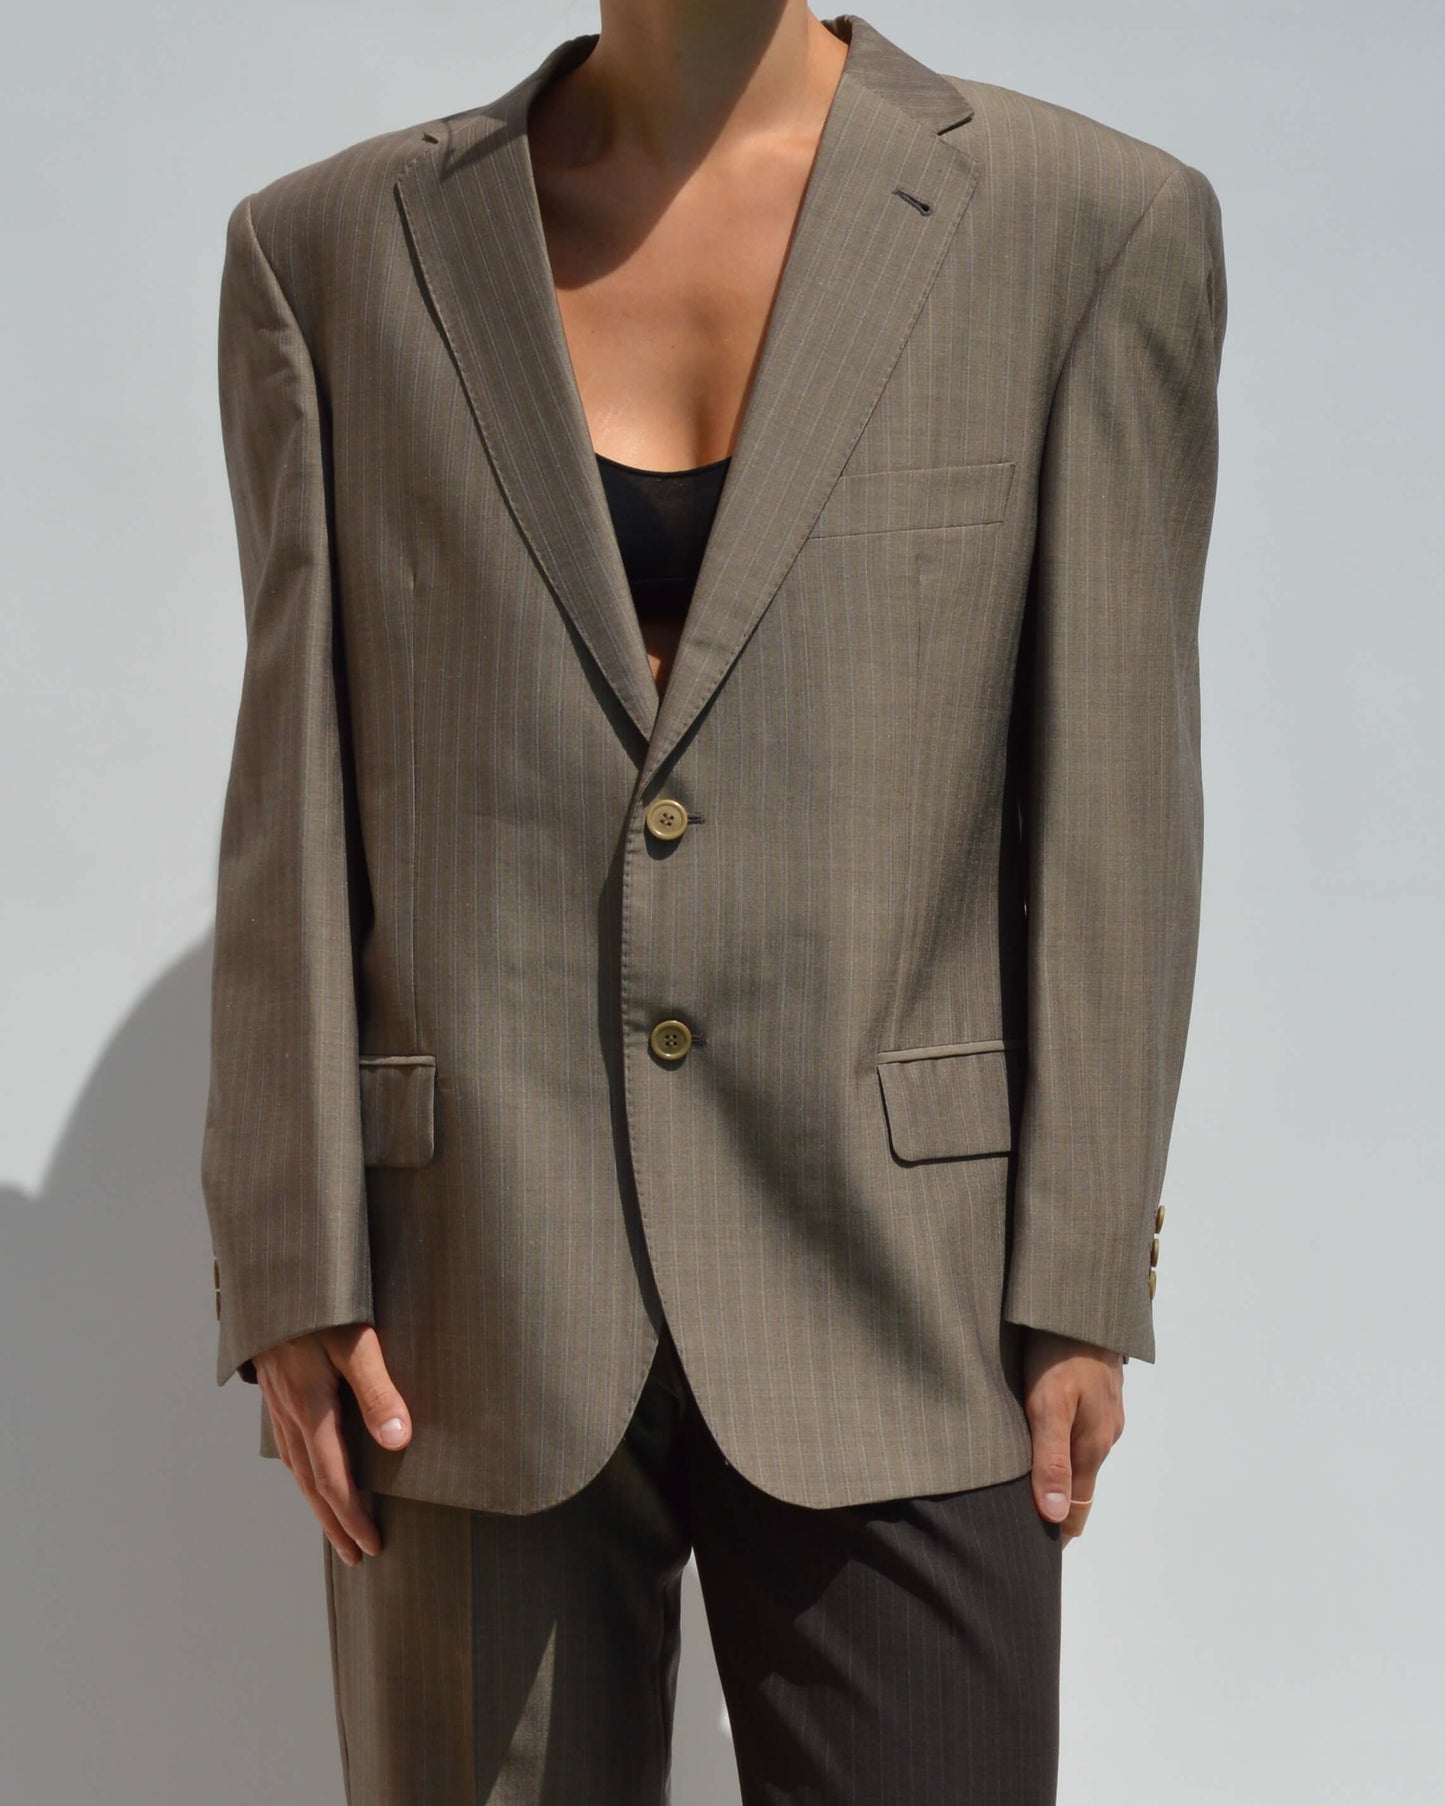 DUO Suit - Almond (XS/M)